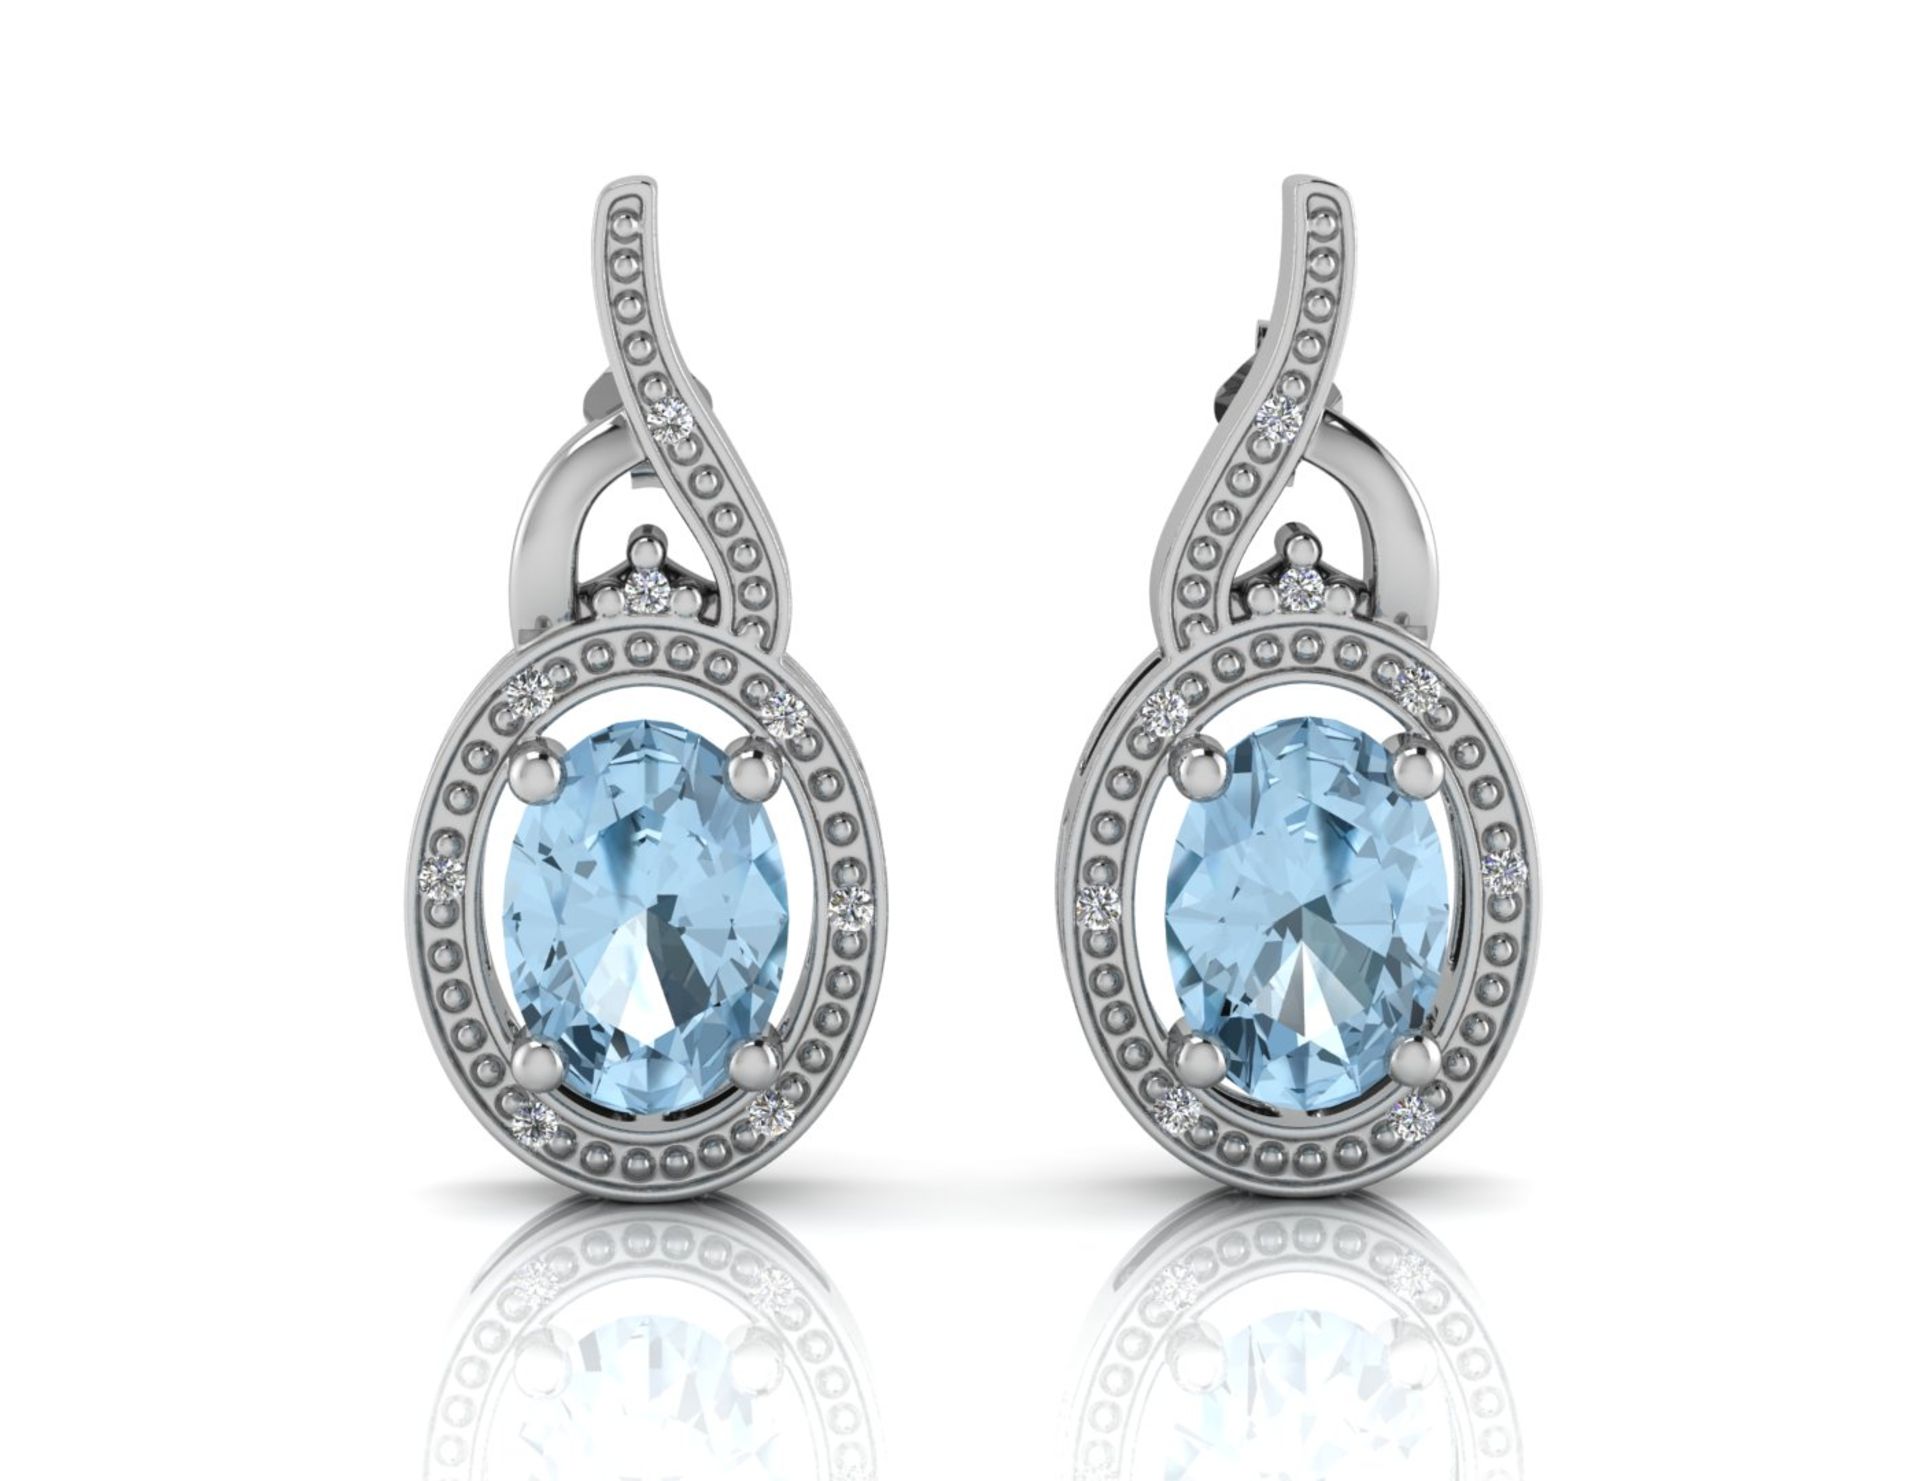 UNUSED - Certified by GIE 9ct White Gold Diamond And Blue Topaz Earring 0.05 Carats, Colour-D, - Image 3 of 4